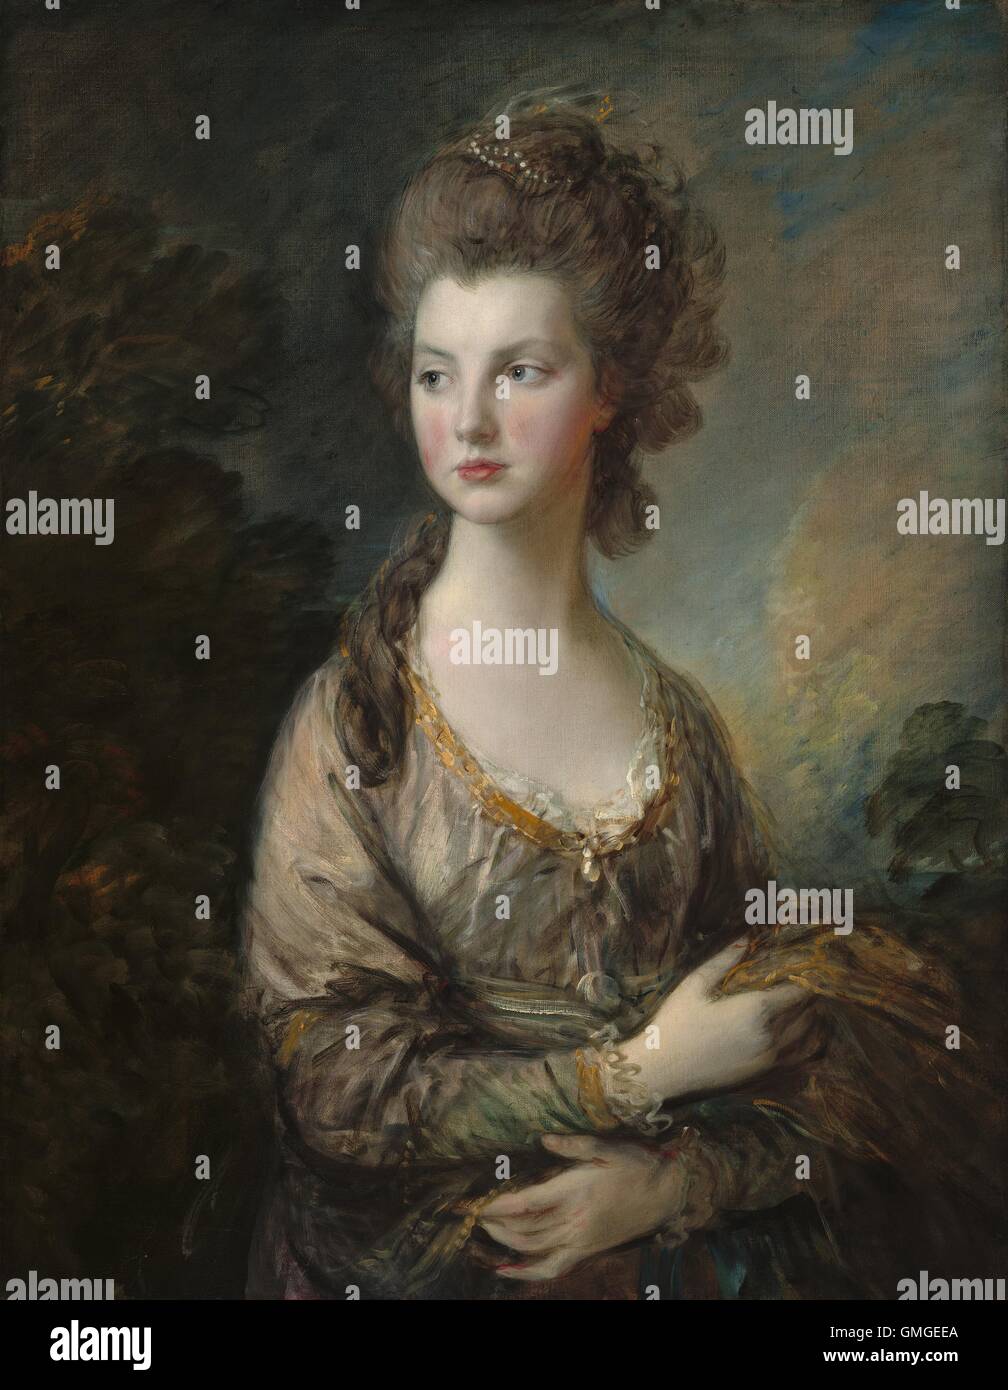 The Honorable Mrs. Thomas Graham, by Thomas Gainsborough, 1775-77, British painting, oil on canvas. Born the Honorable Mary Cathcart, daughter of 9th Baron Cathcart, who was Ambassador to Catherine the Great. She spent her childhood in Russia before she m (BSLOC 2016 6 134) Stock Photo